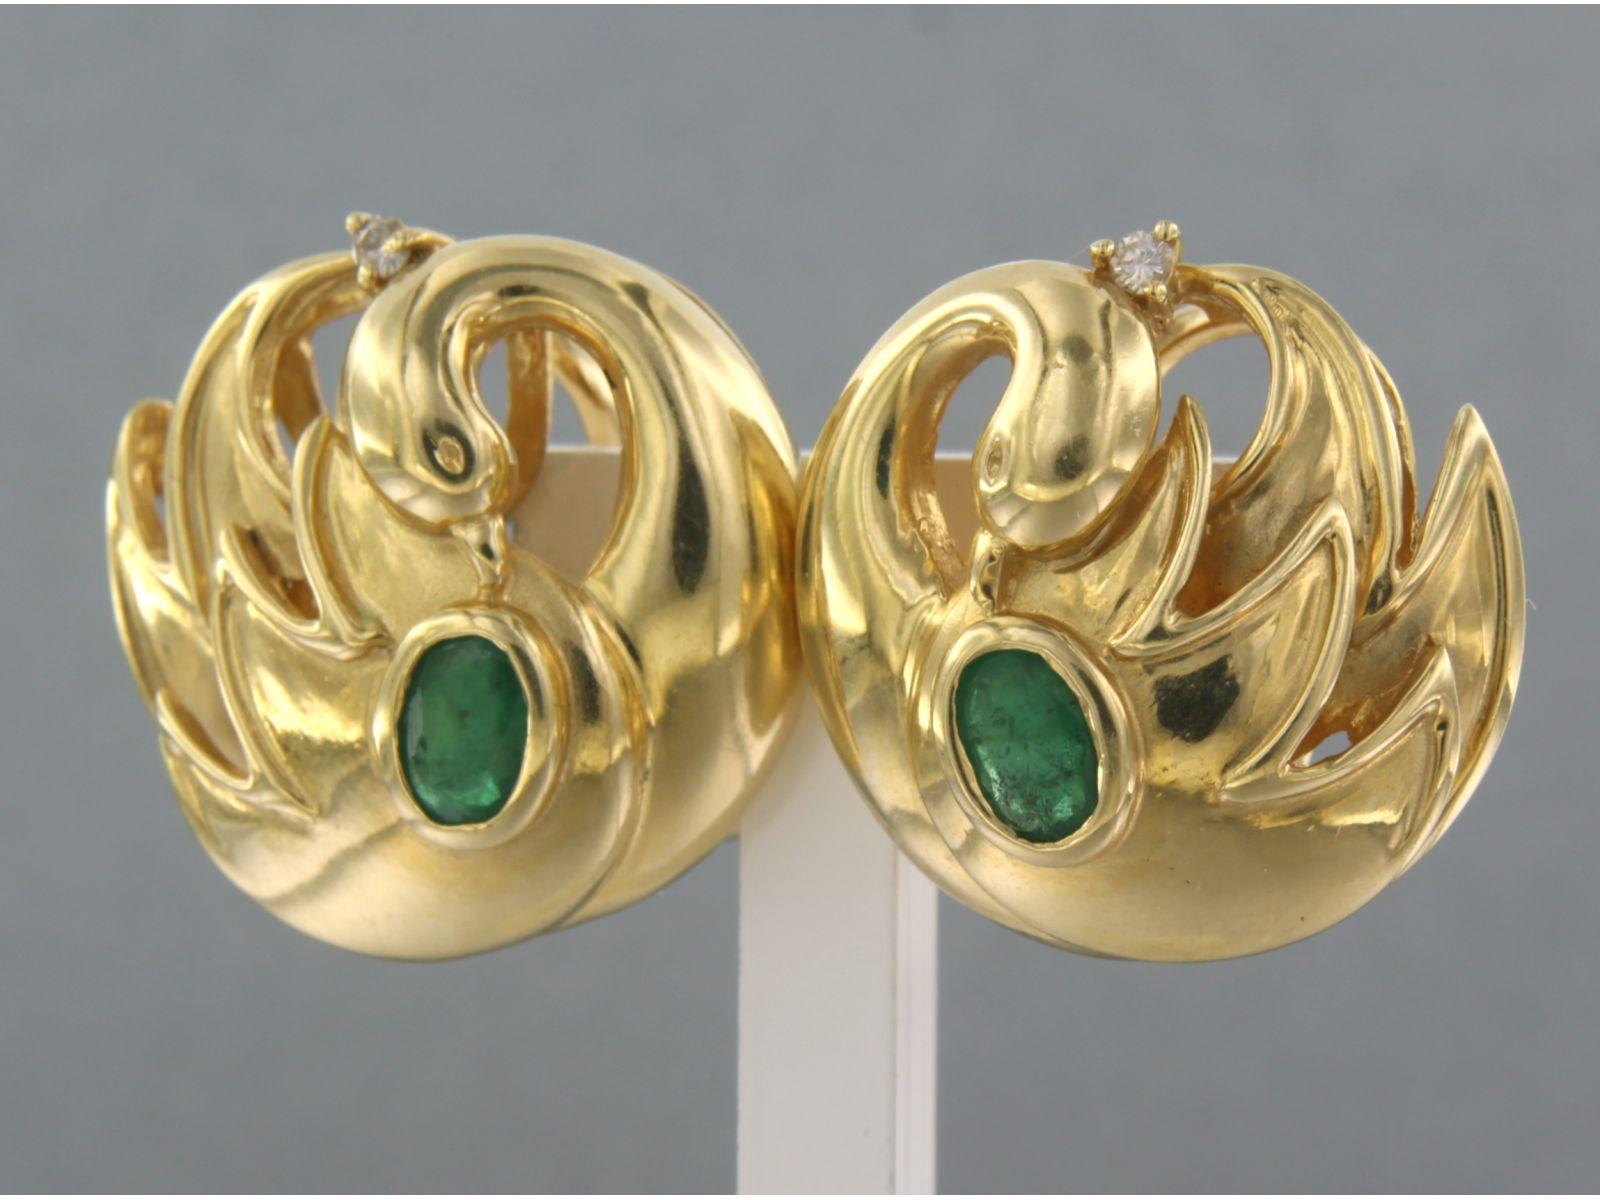 Brilliant Cut Earrings with emerald and diamonds 18k yellow gold